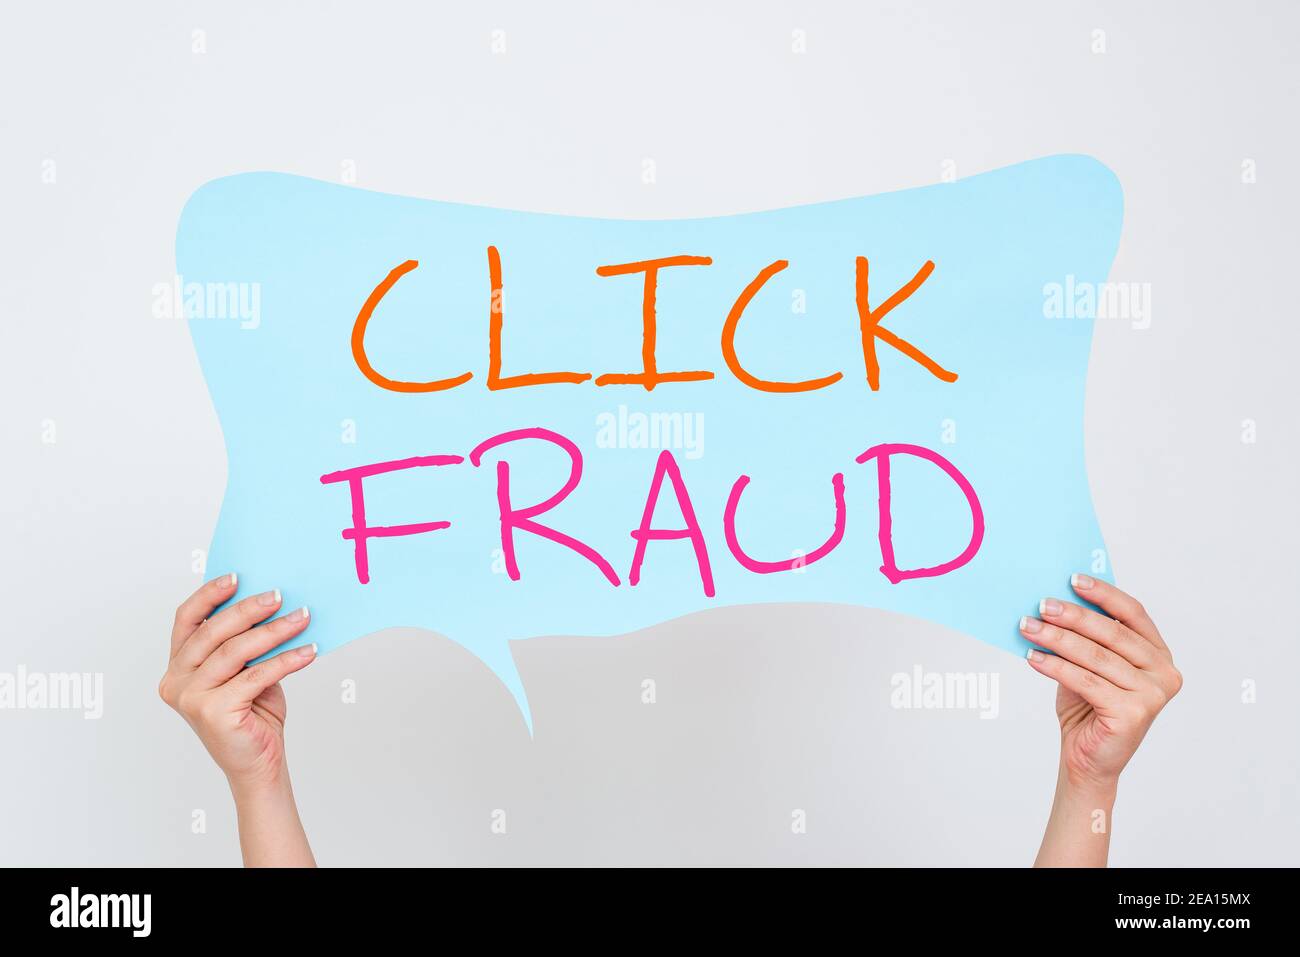 Conceptual hand writing showing Click Fraud. Concept meaning practice of repeatedly clicking on advertisement hosted website Empty bubble chat sticker Stock Photo